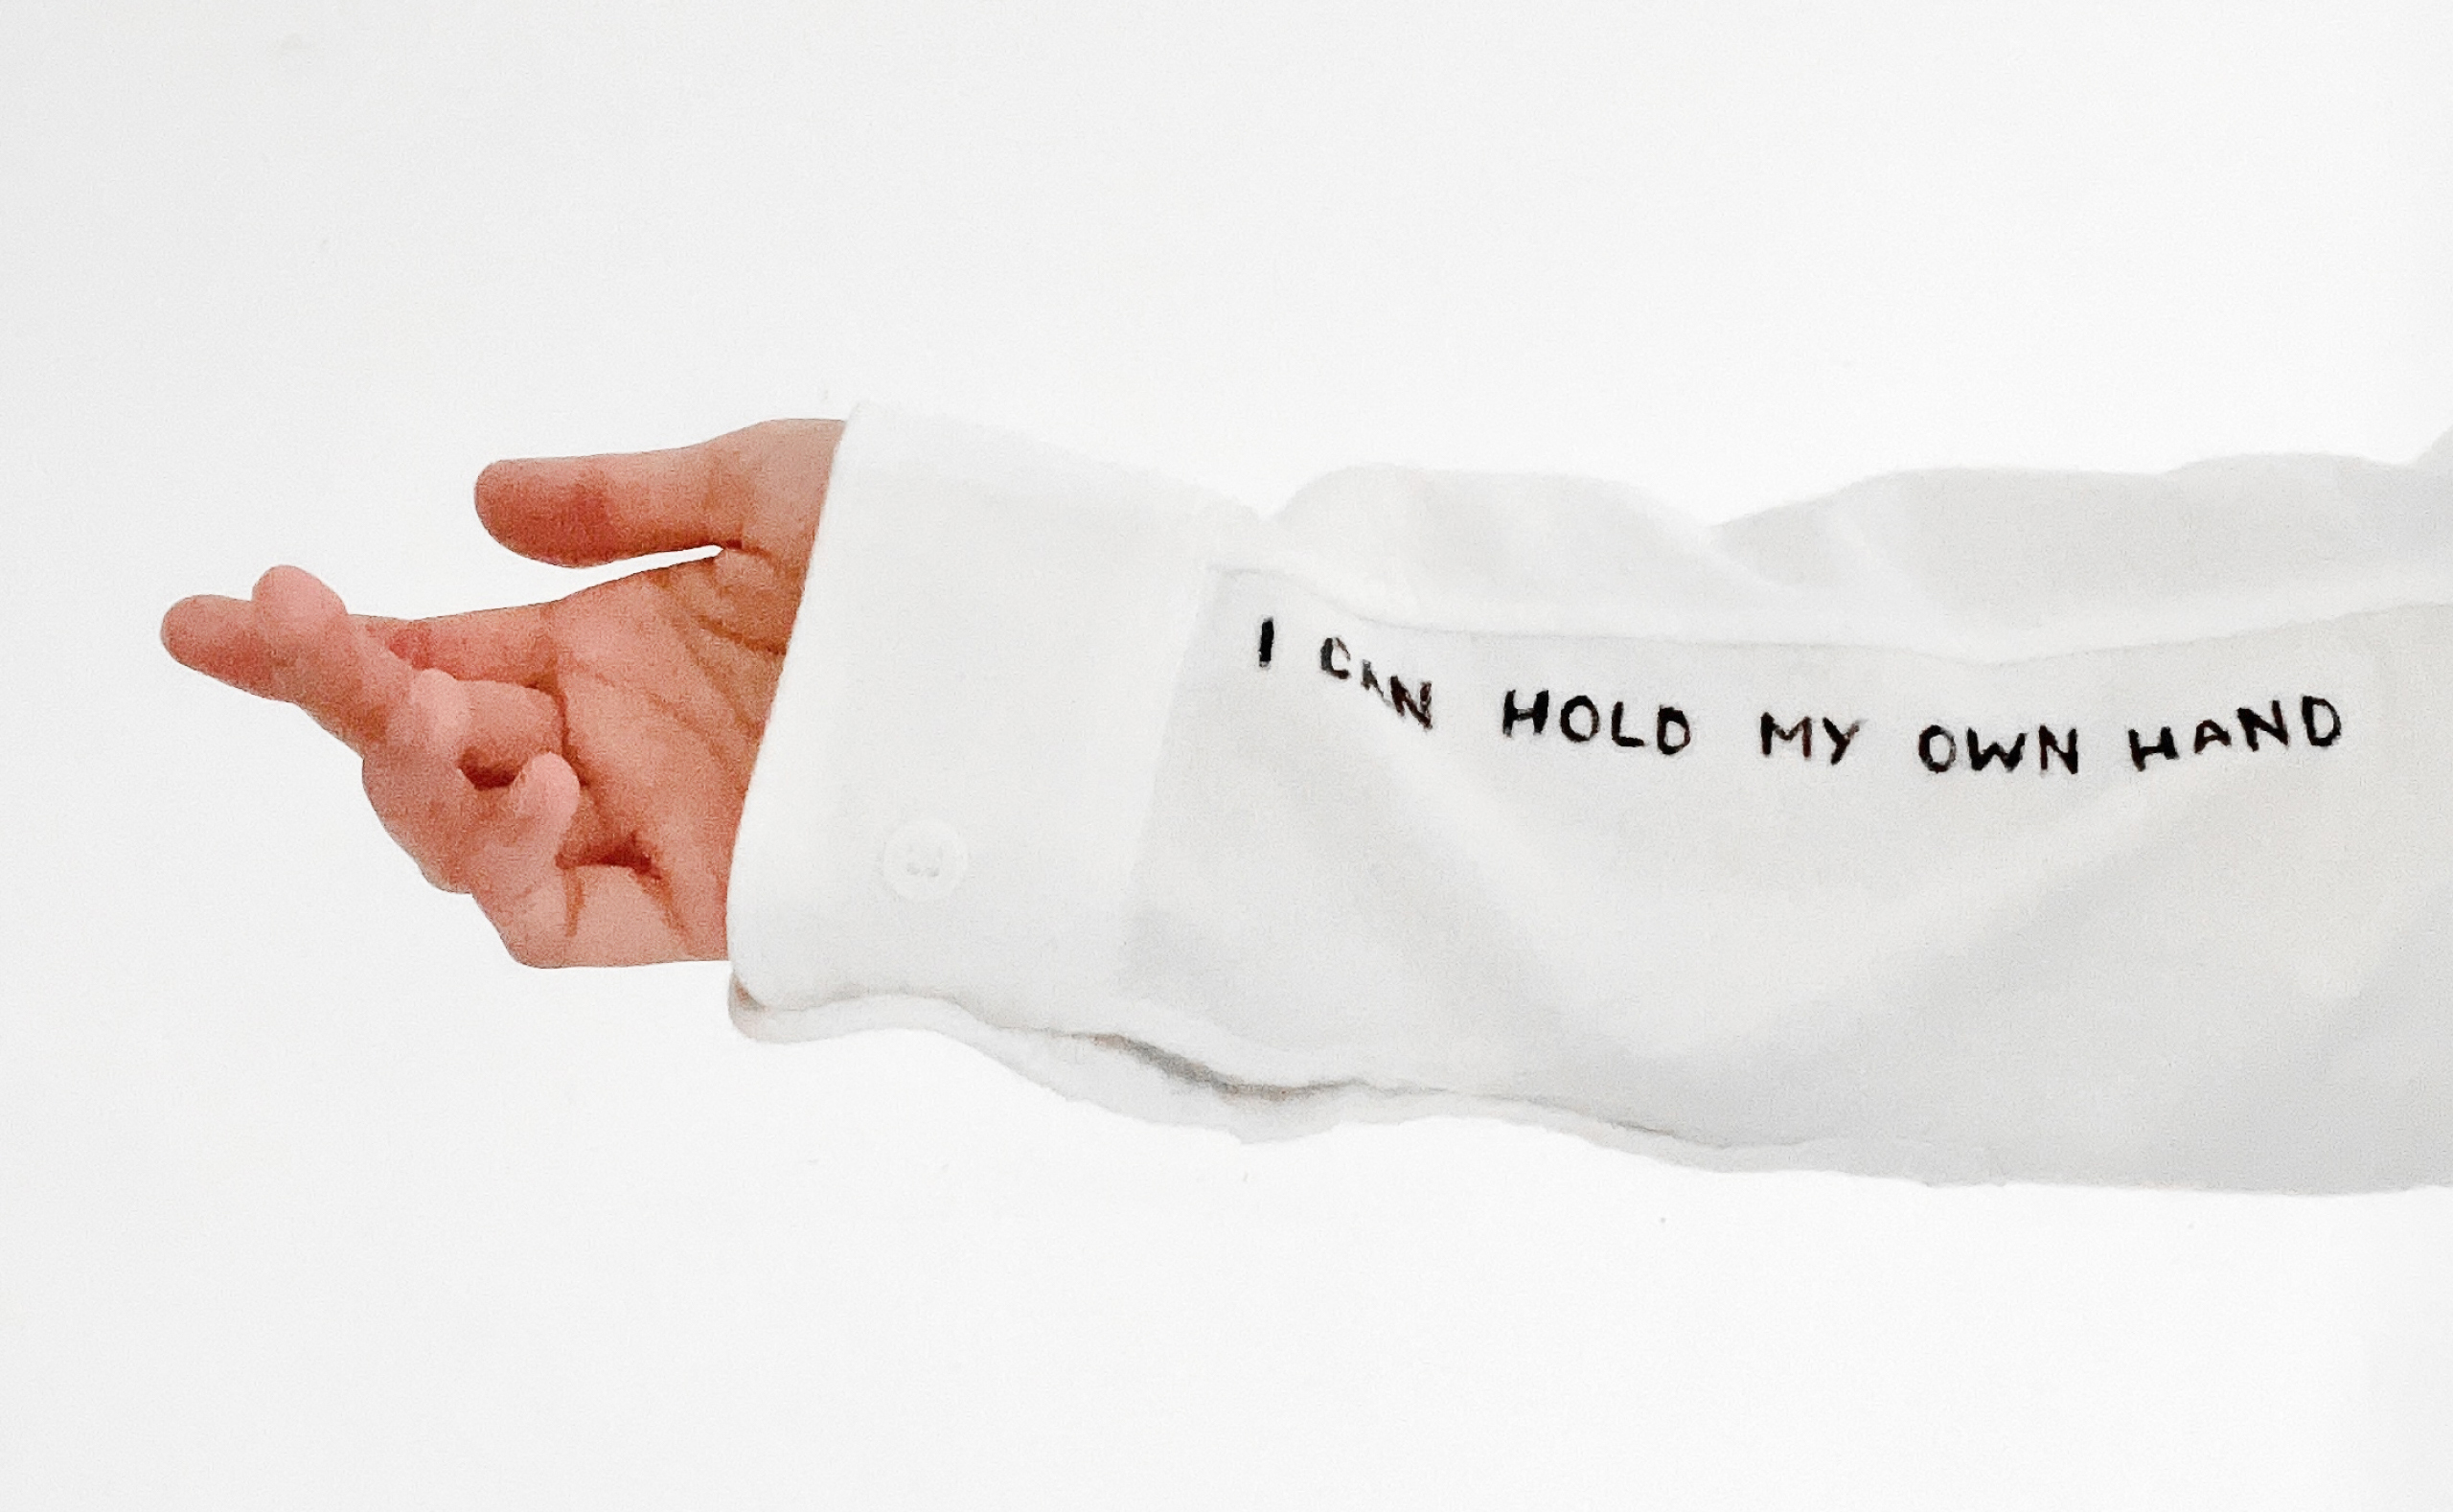 A sign on the sleeve of the shirt saying "I can hold my own hand"